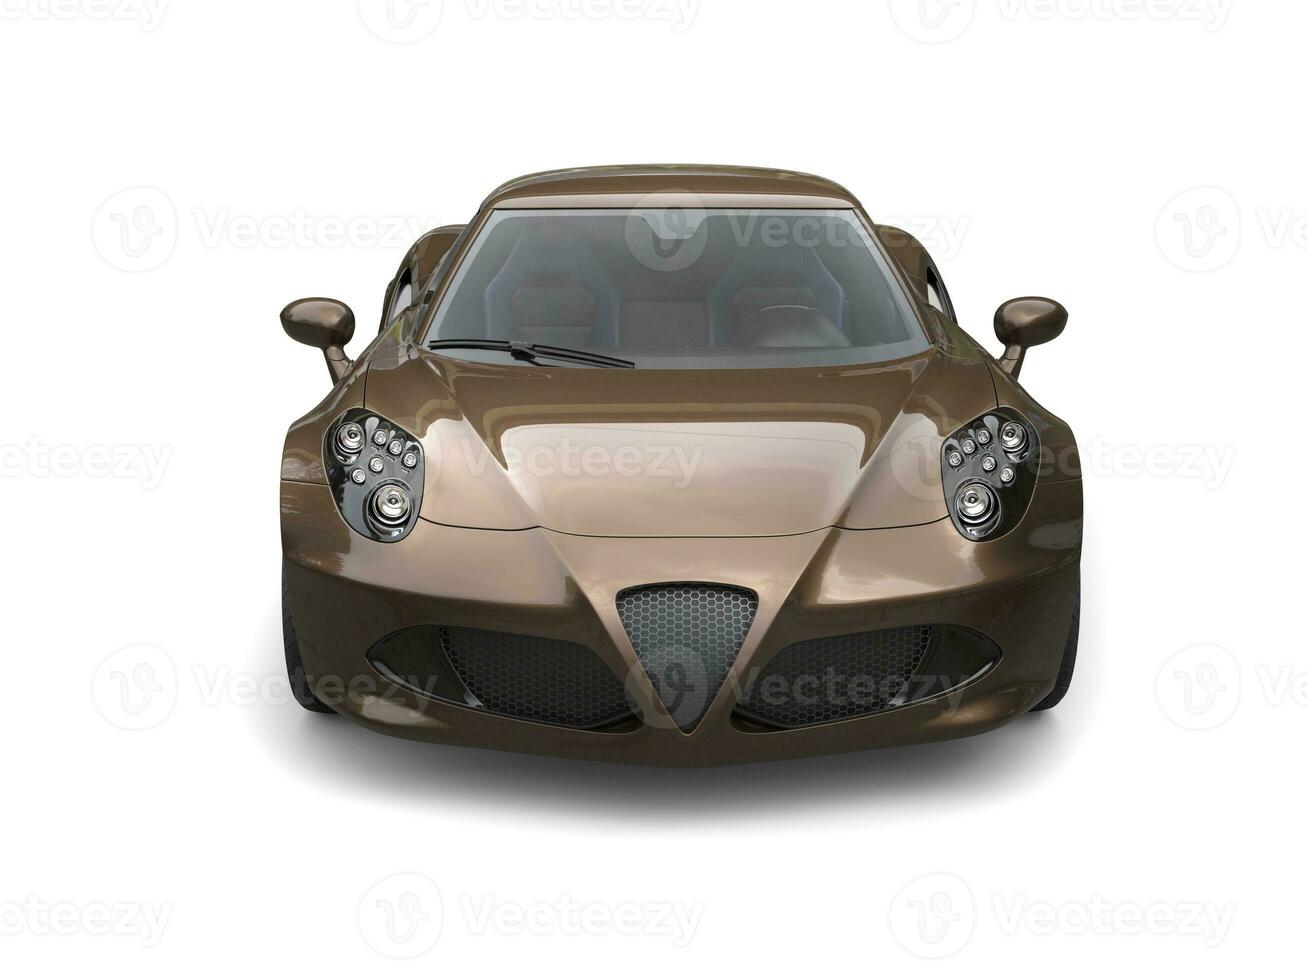 Coffee brown luxury sports car - front view photo